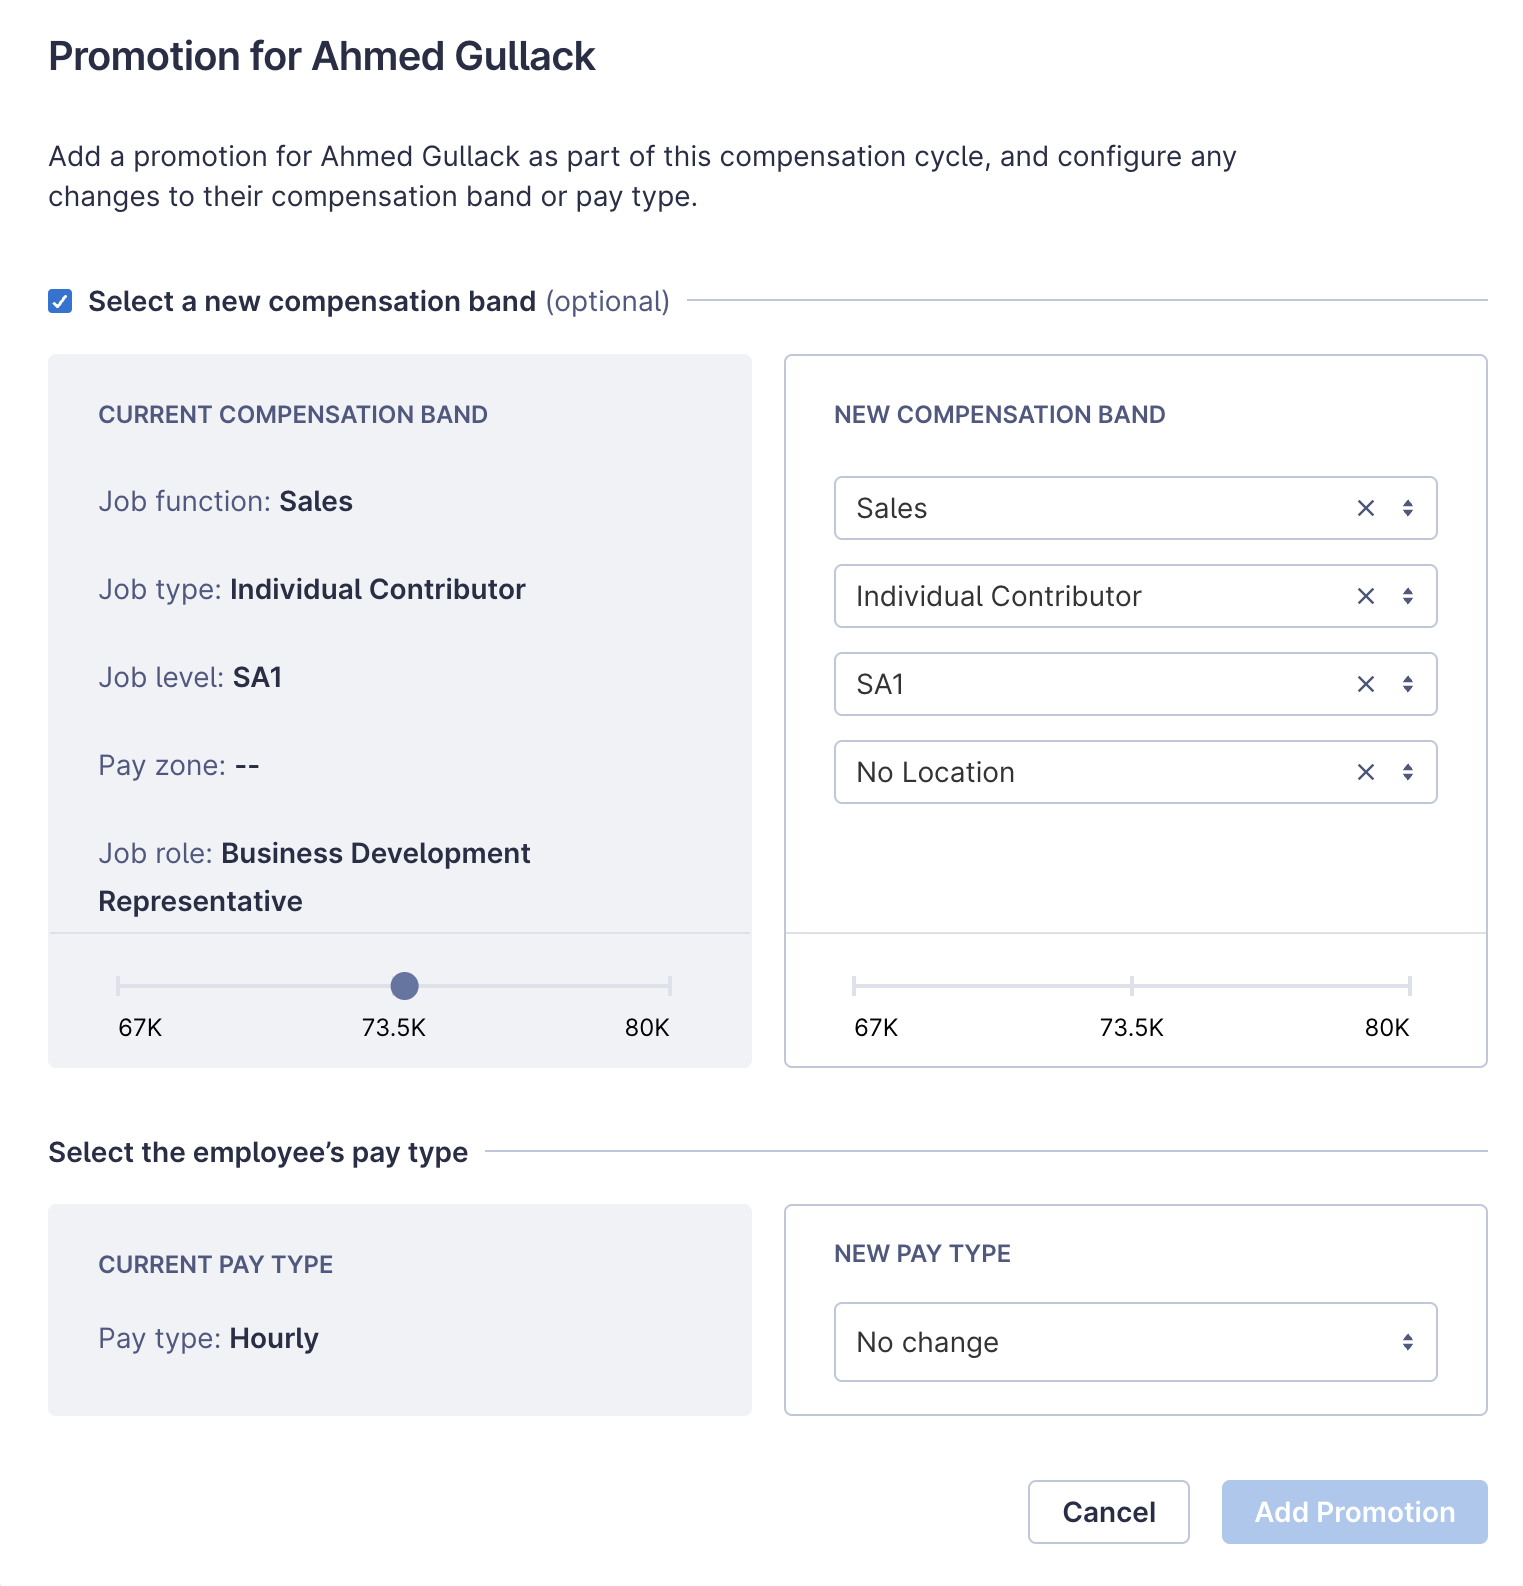 Promotion modal. There are two sections: 1. Select a new compensation band where you can select new job function, job type, level, and location. 2. Change from previous pay type to a new pay type.